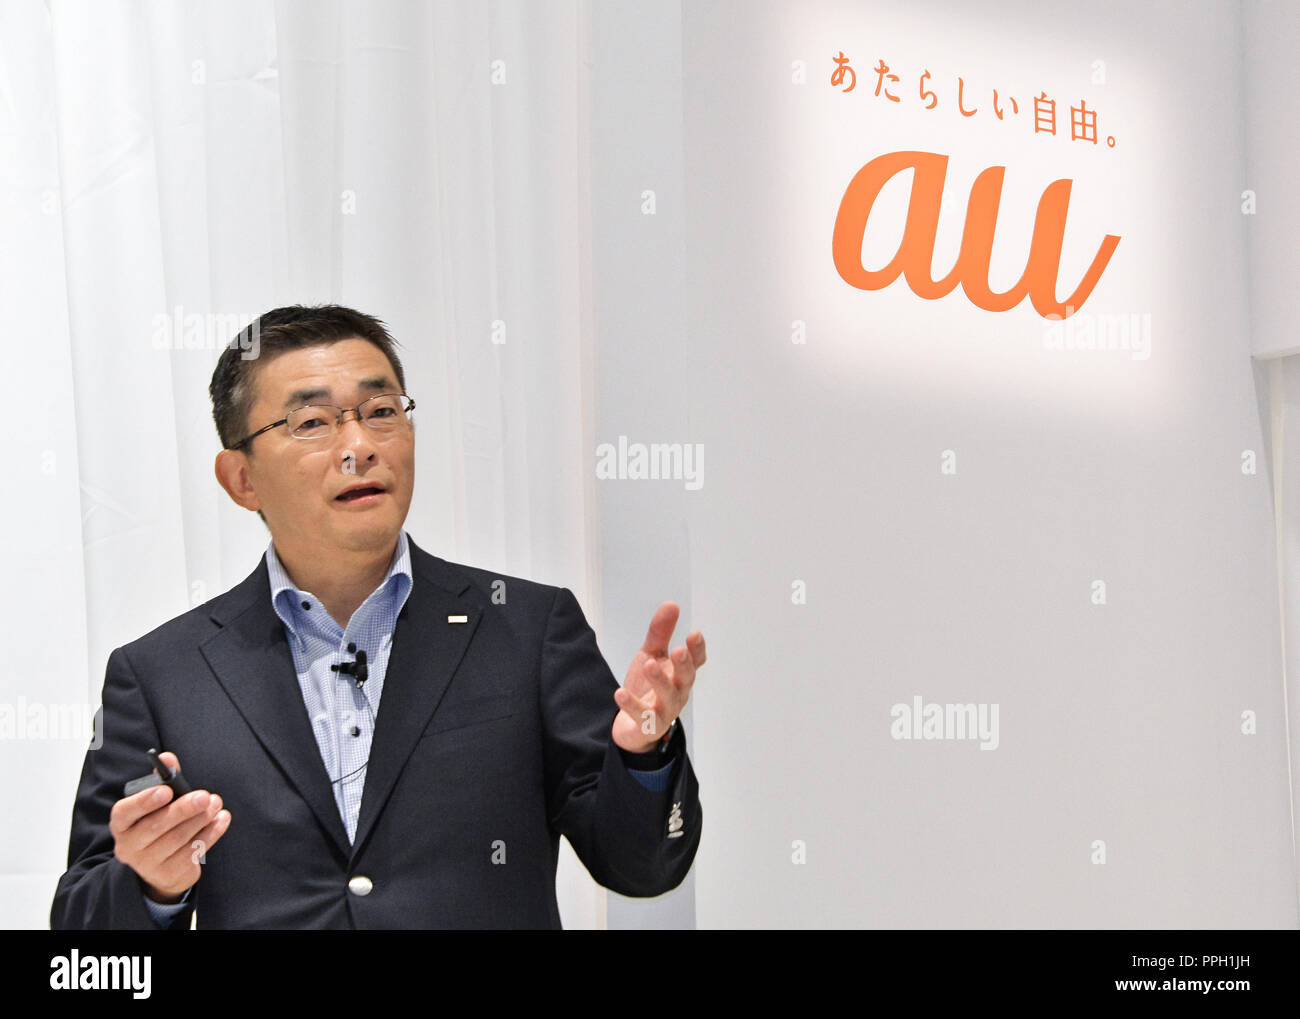 iPhone Xs, Apple, KDDI, au, September 21, 2018, Tokyo, Japan : Makoto Takahashi, President of KDDI Corporation speaks during a launch event for Apple New iPhone Xs and Xs Max at the KDDI's au Shinjuku store in Tokyo, Japan, on September 21, 2018. Credit: AFLO/Alamy Live News Stock Photo